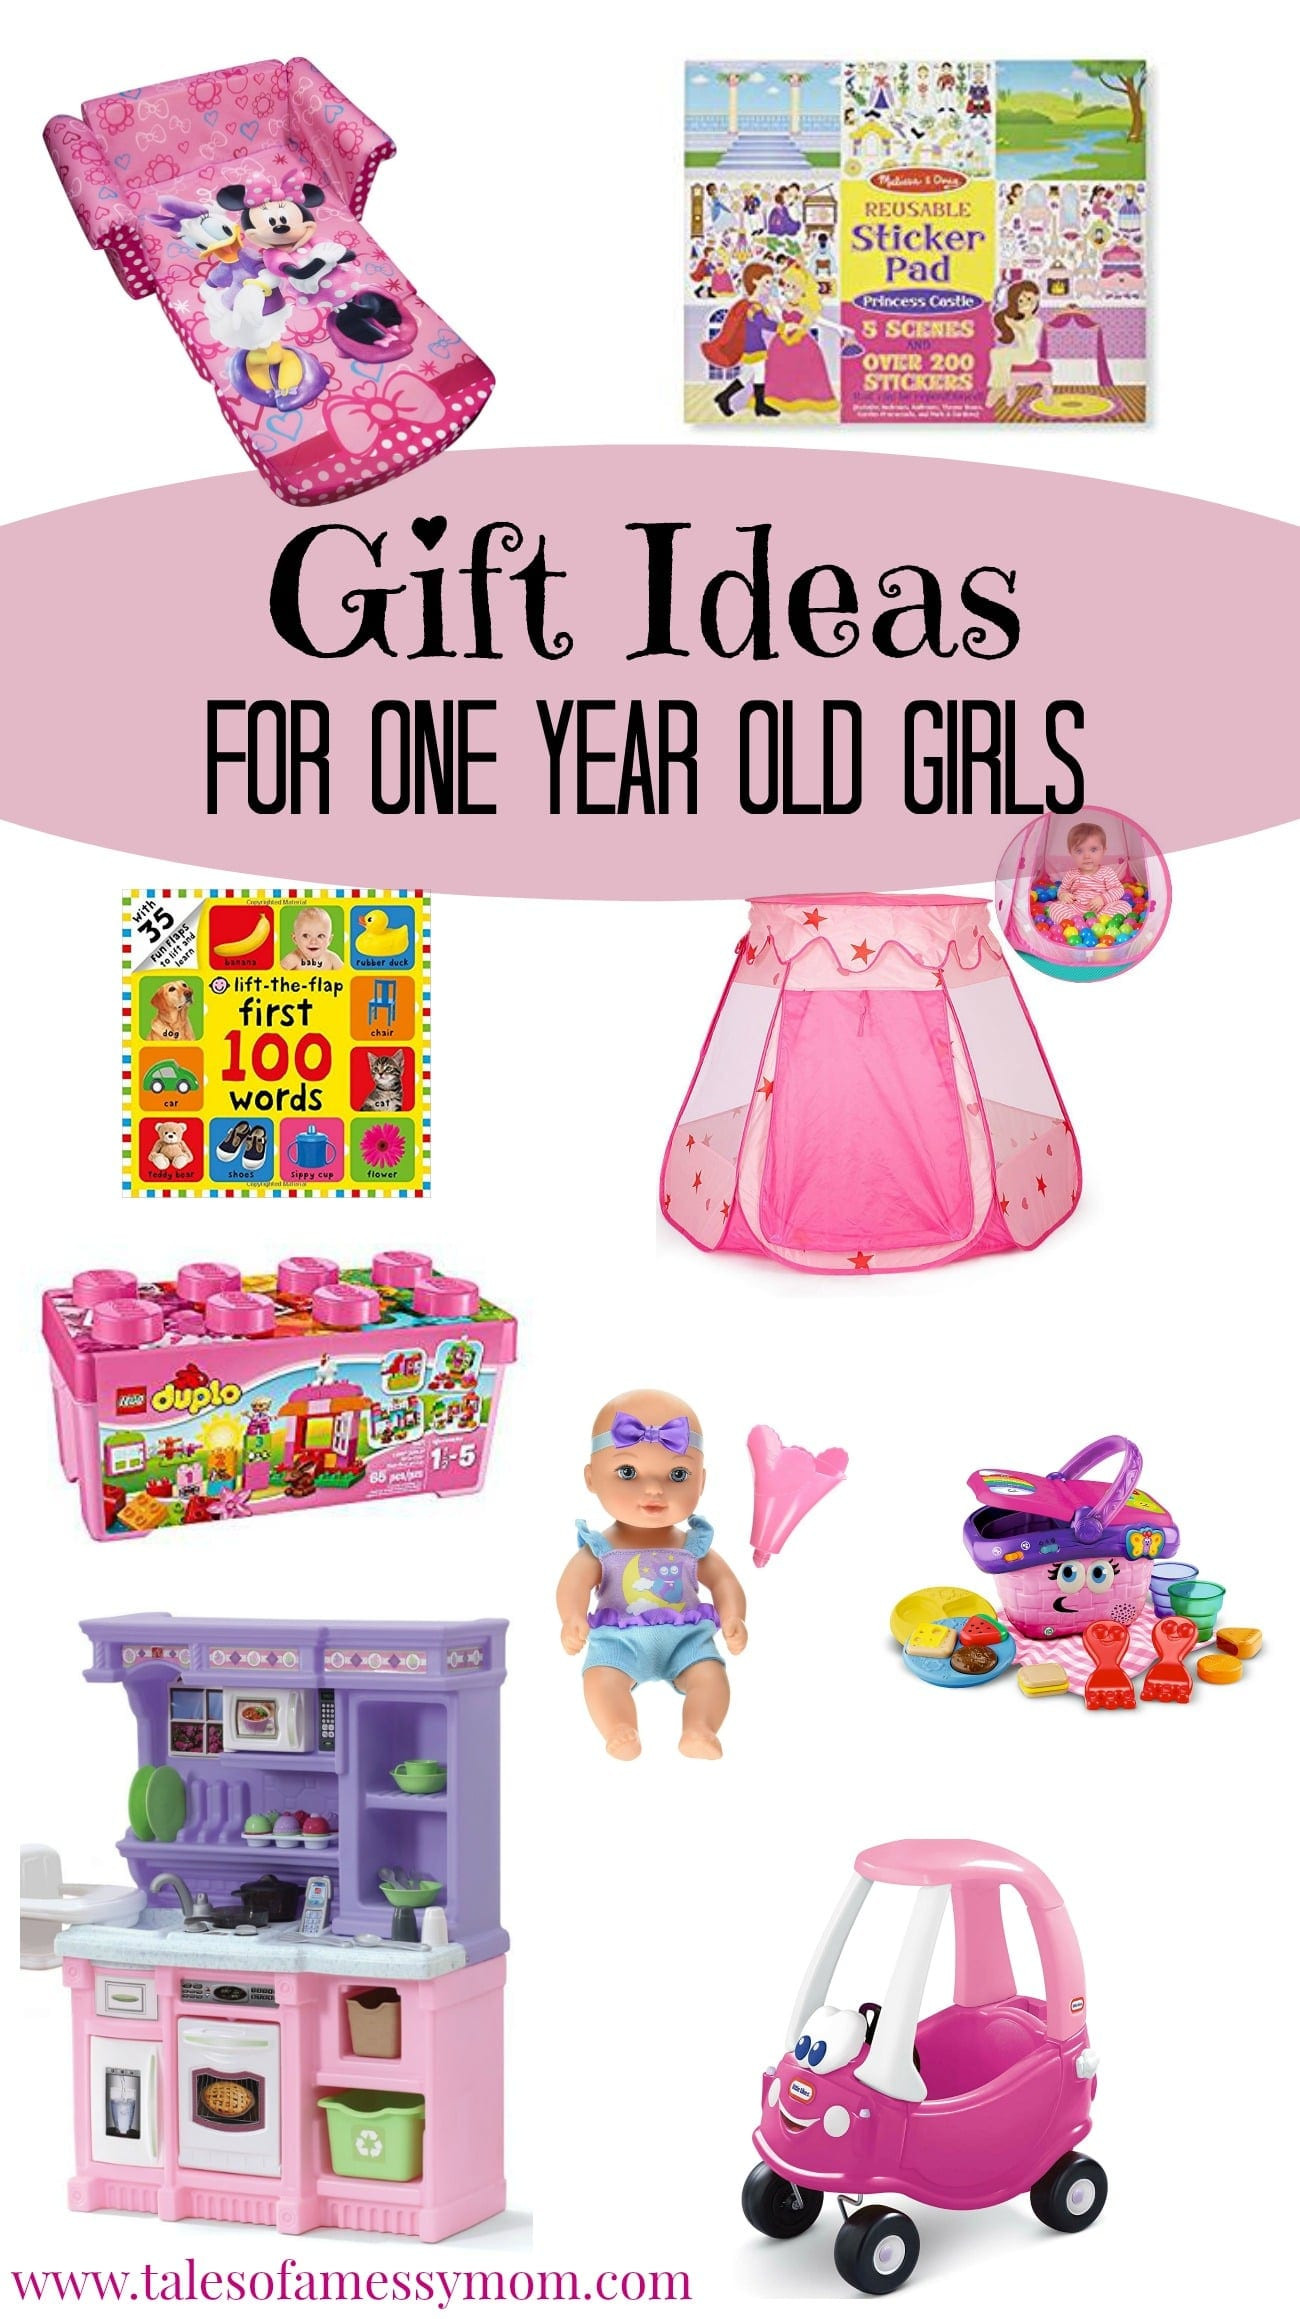 One Year Gift Ideas For Girlfriend
 Gift Ideas for e Year Old Girls Tales of a Messy Mom